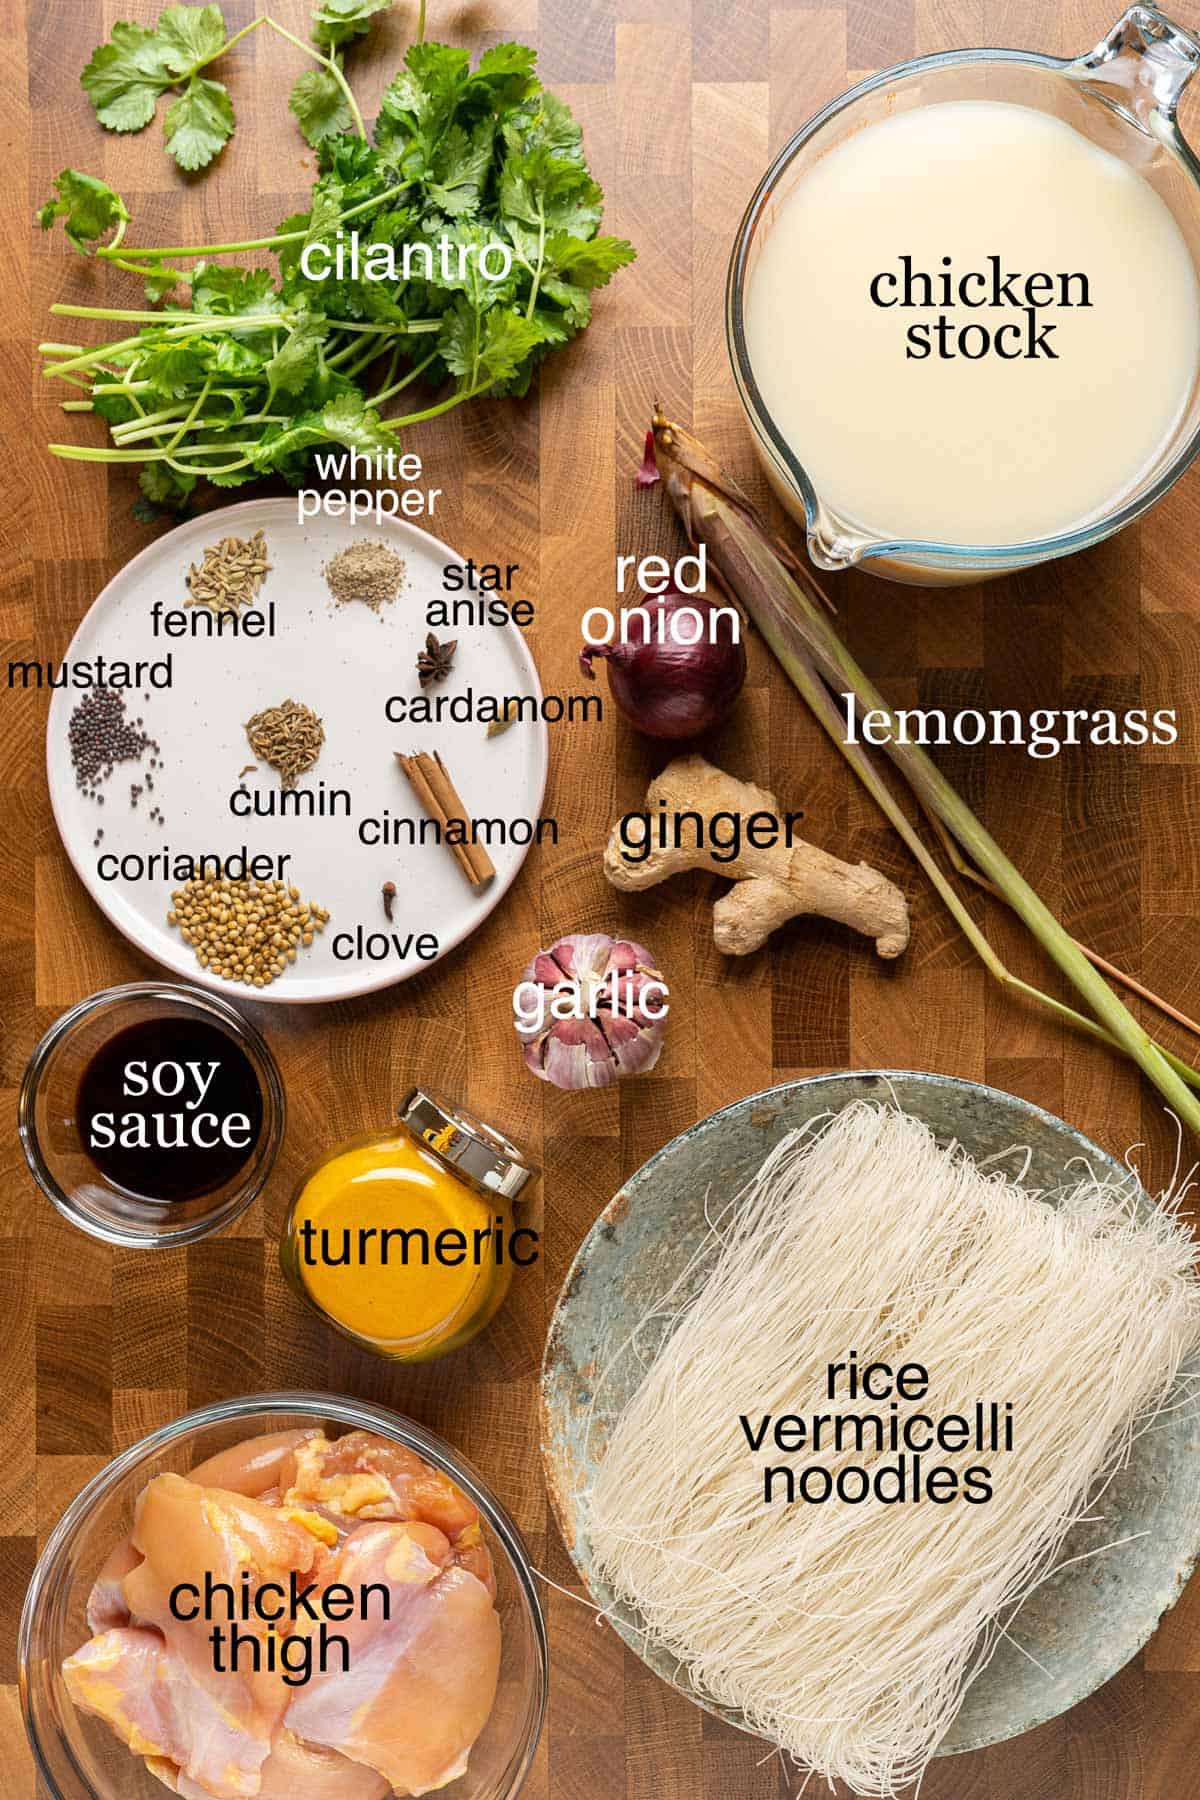 Ingredients to make lemongrass ginger chicken soup with rice noodles